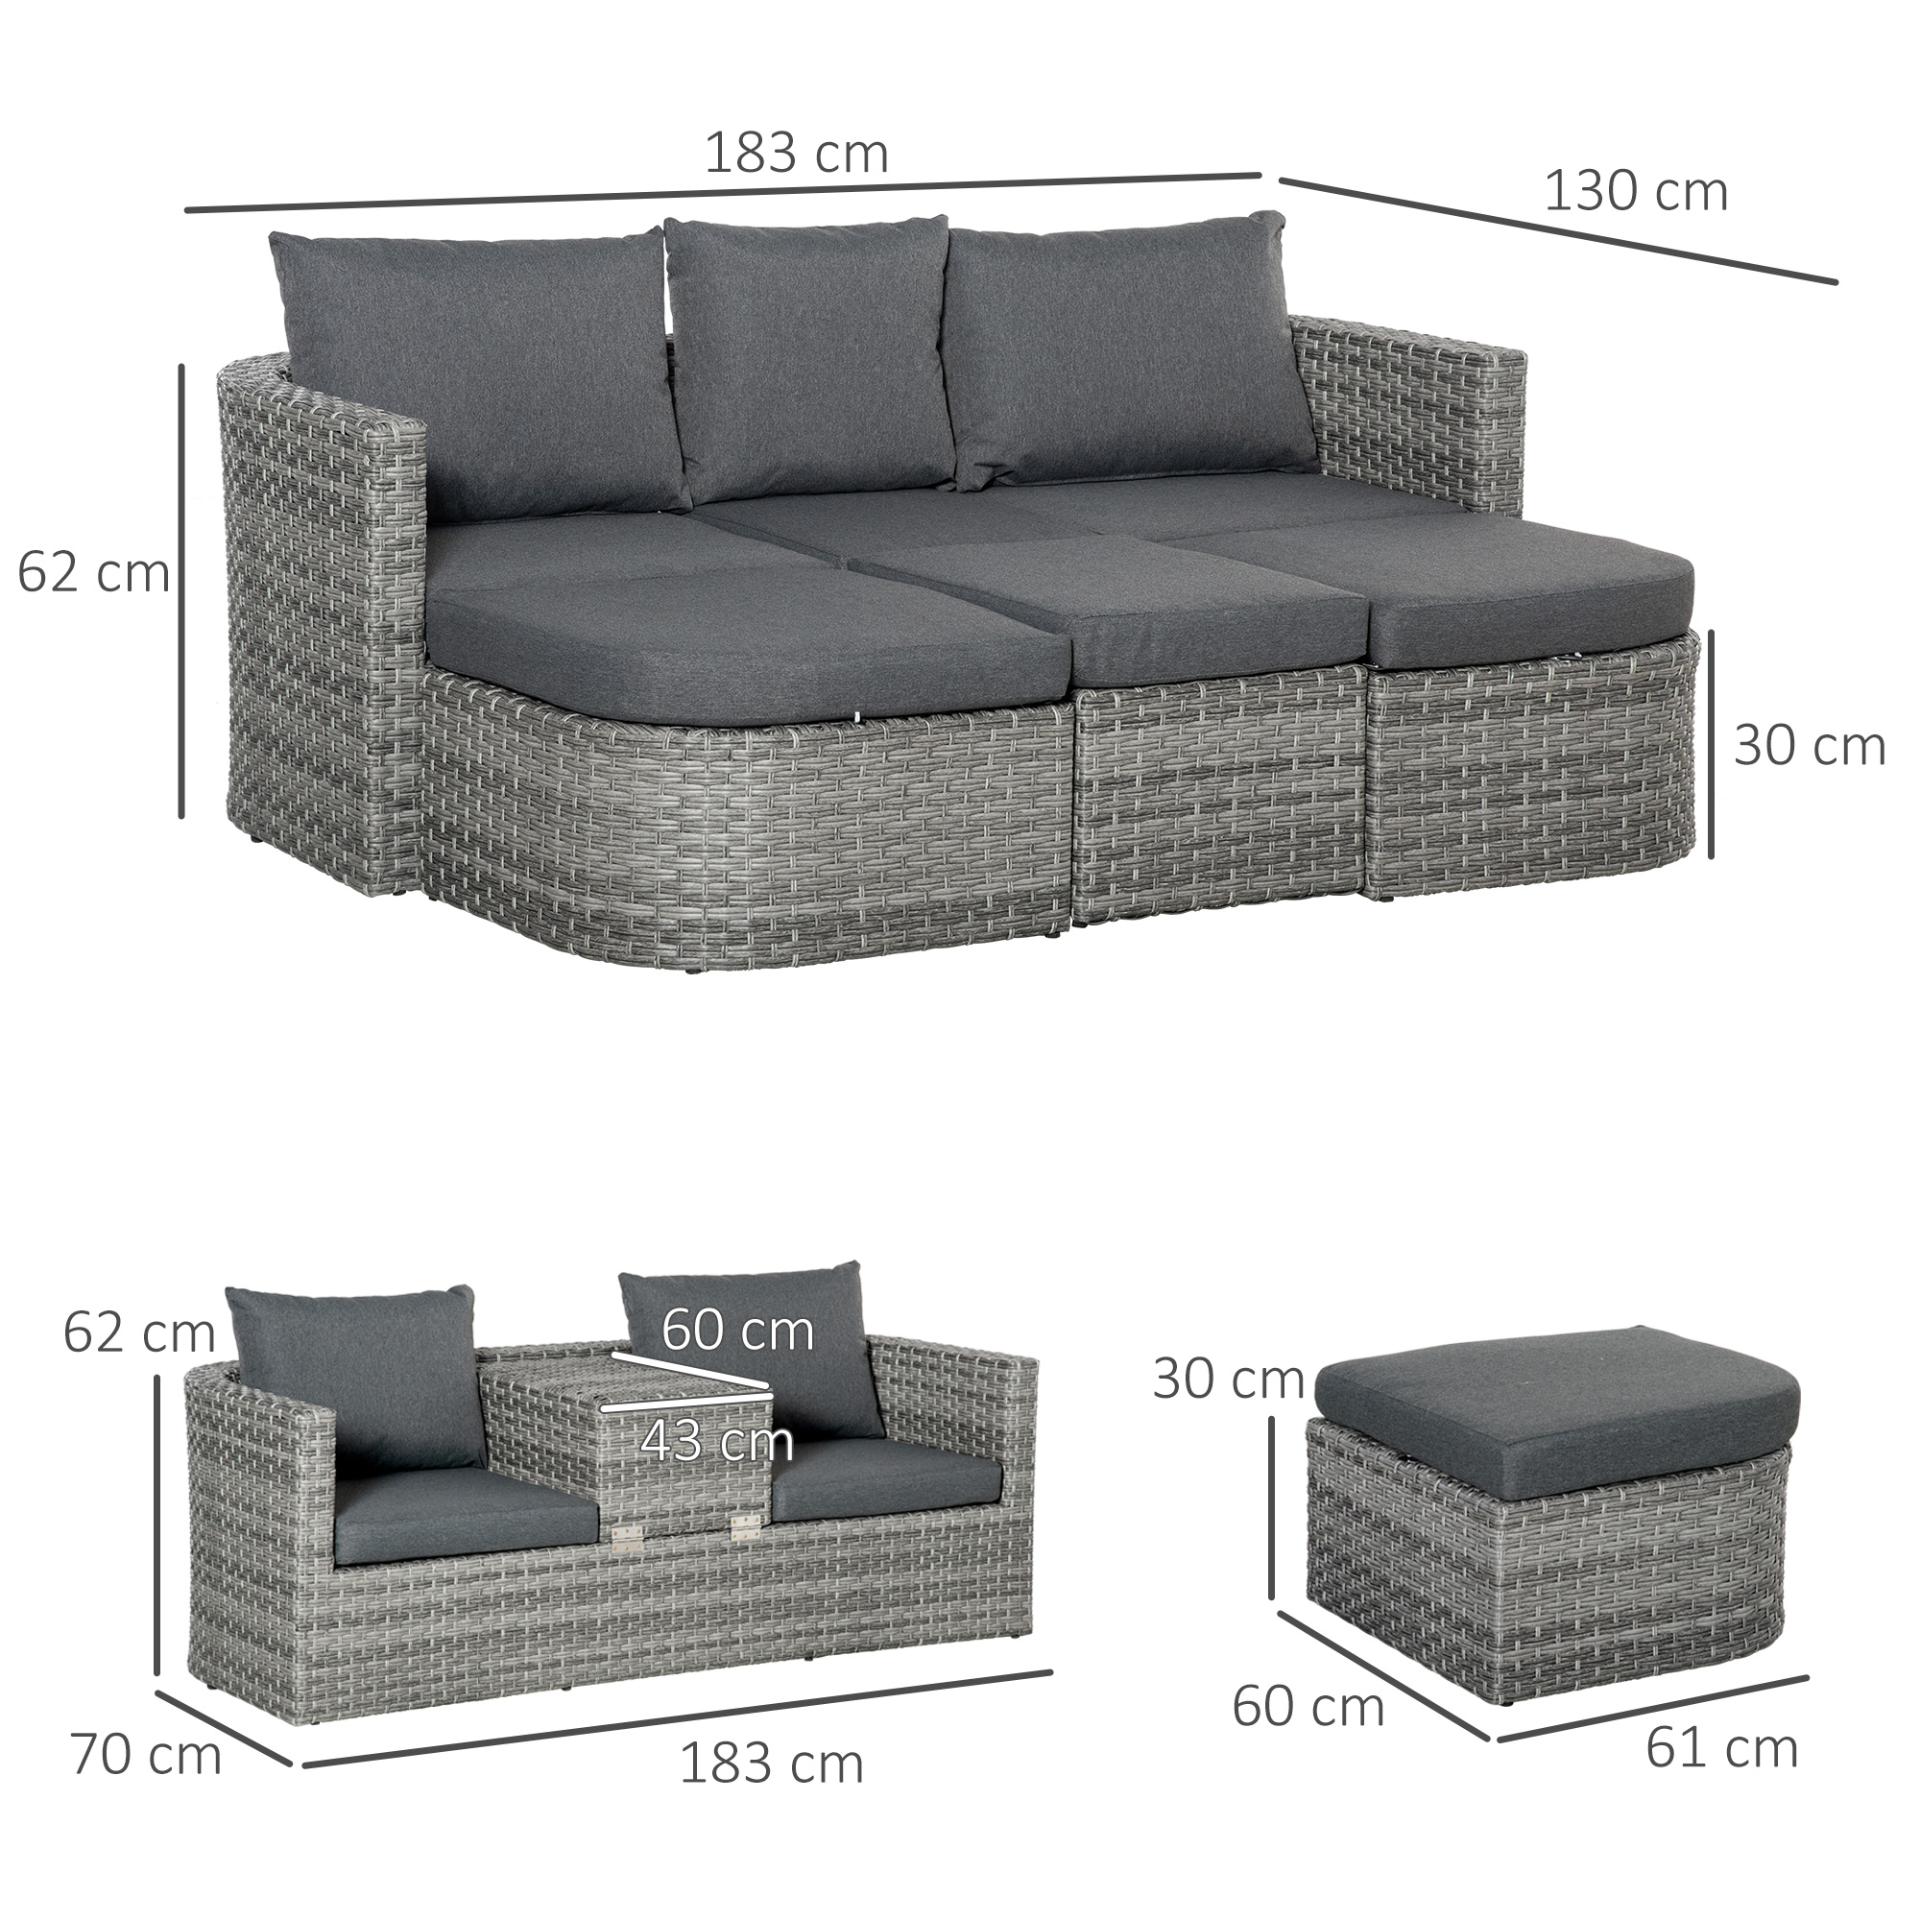 Outsunny Three Pieces Outdoor PE Rattan Sofa Set, Patio Wicker Conversation Double Chaise Lounge Furniture Set w/ Side Table, Large Daybed w/ Cushion, Mixed Grey